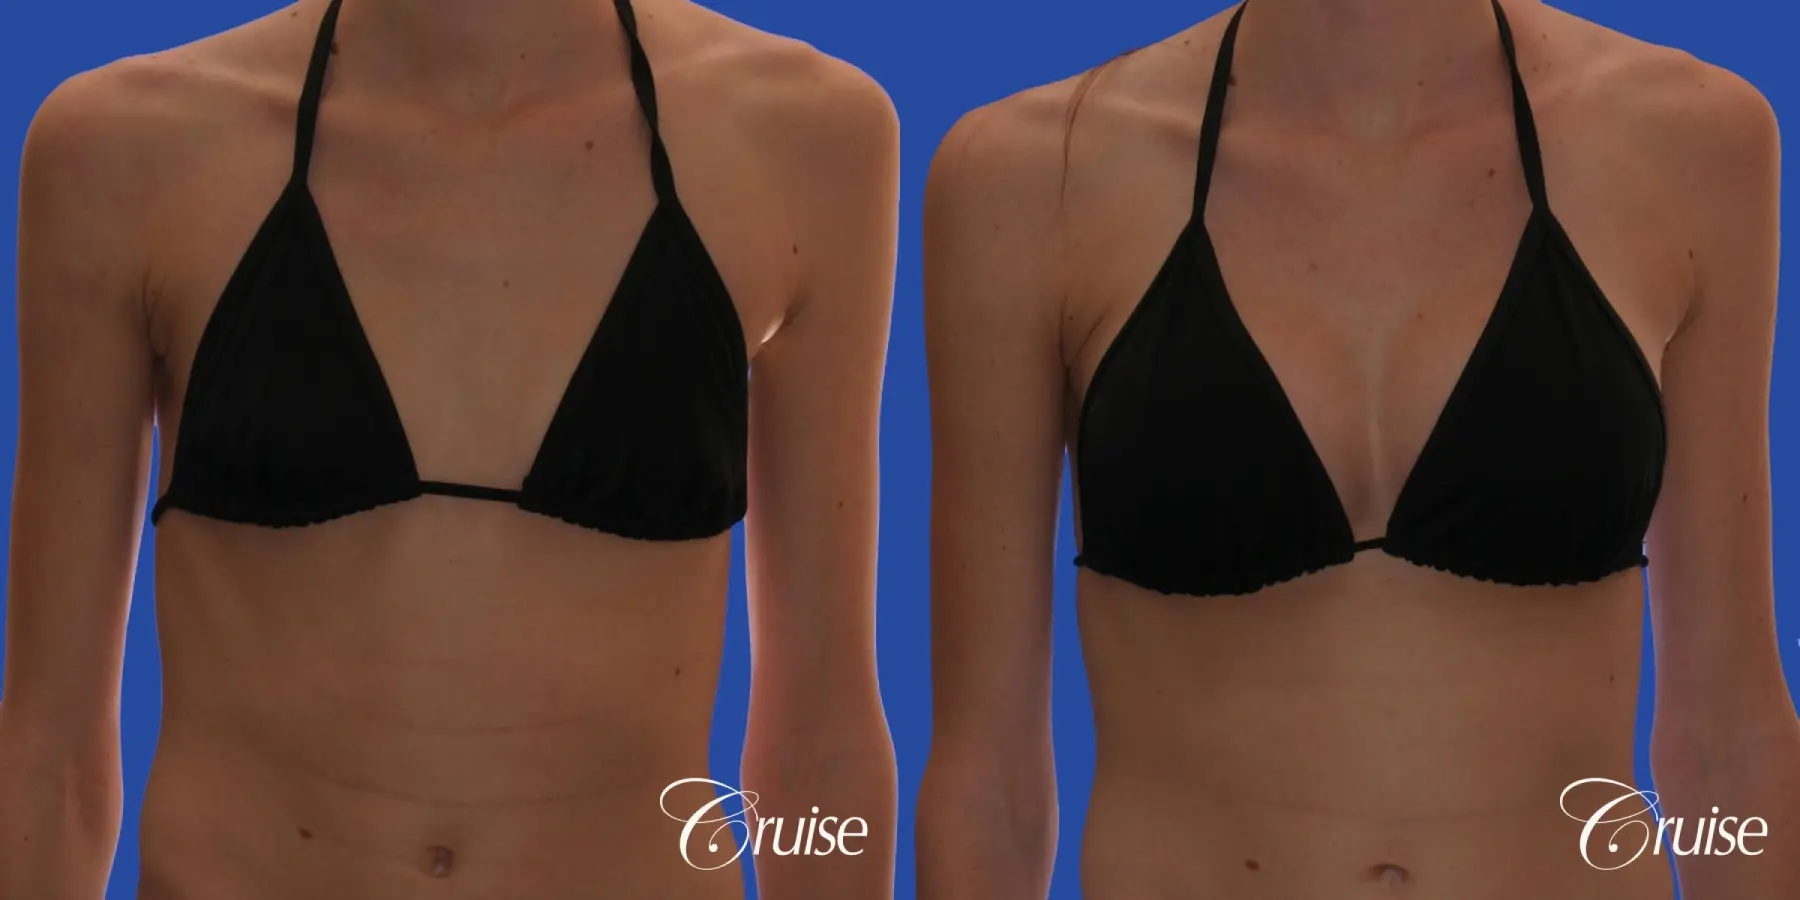 Breast Augmentation - Before and After 4